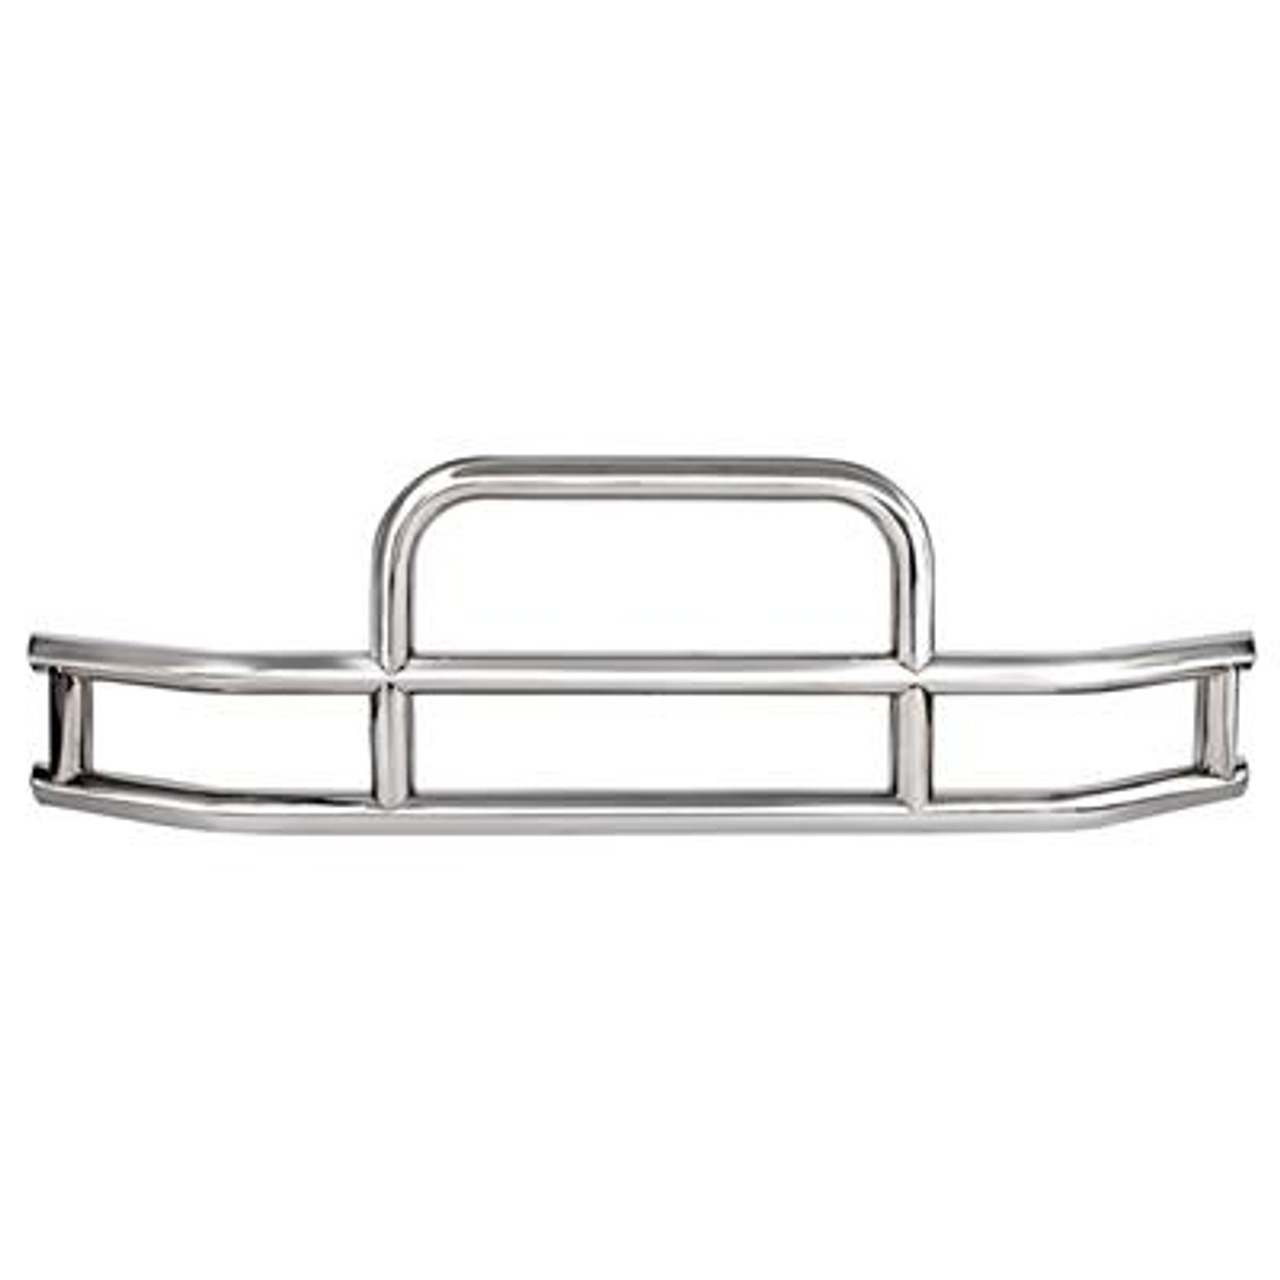 304 Stainless Steel Grille Guard (Mounting Bracket Set Sold Separately)